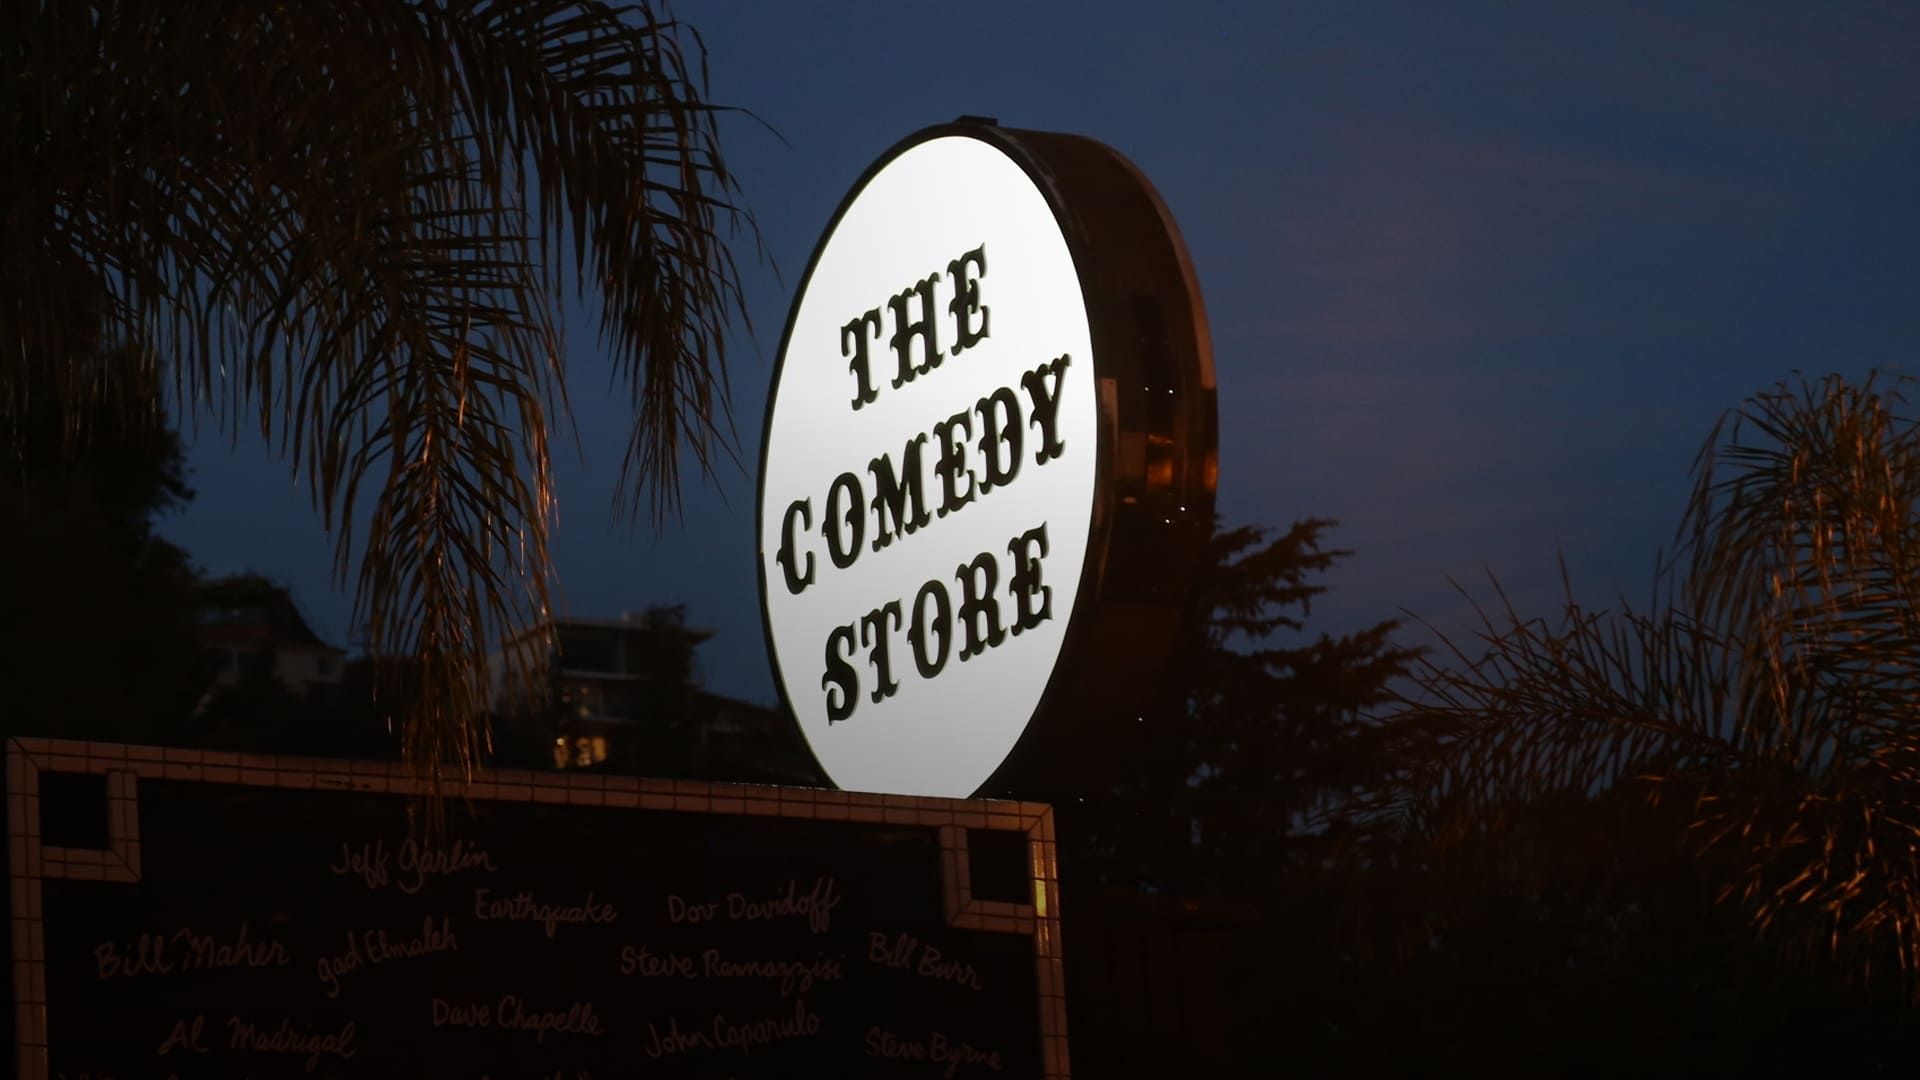 The Comedy Store background